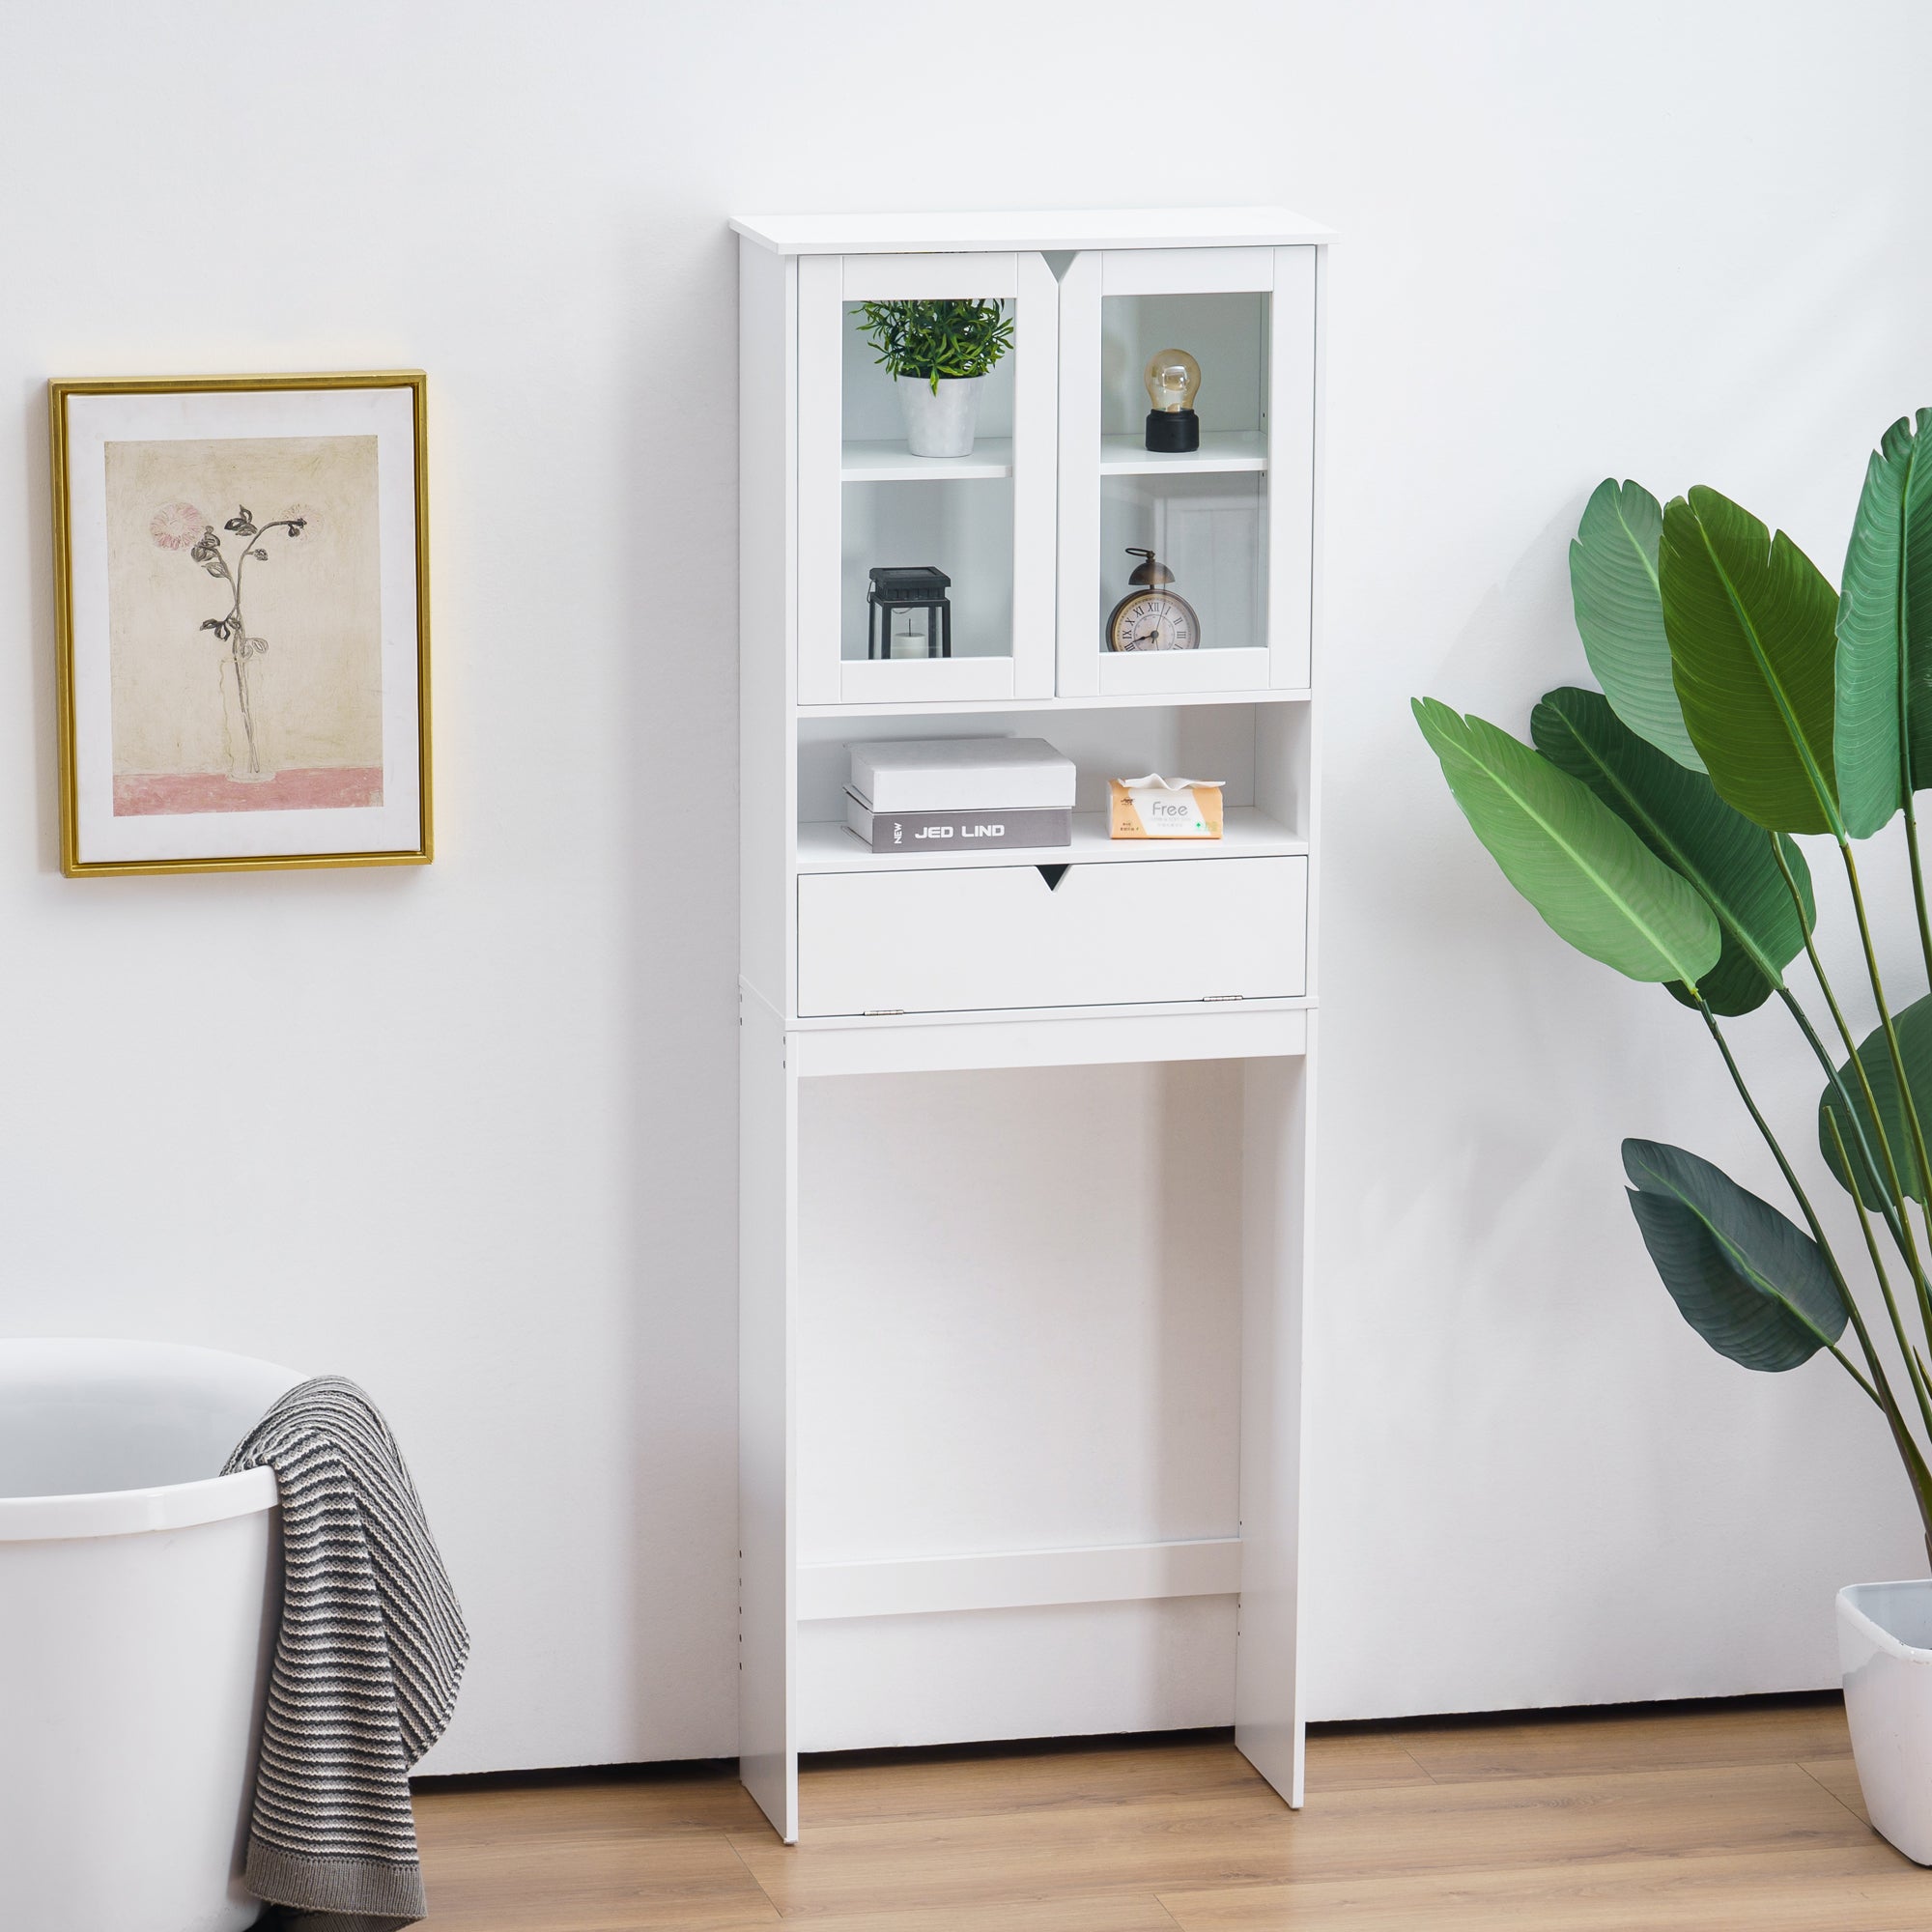 Ivinta Over The Toilet Bathroom Storage Cabinet with Adjustable Shelf, Space-Saving Wall Mounted Rack